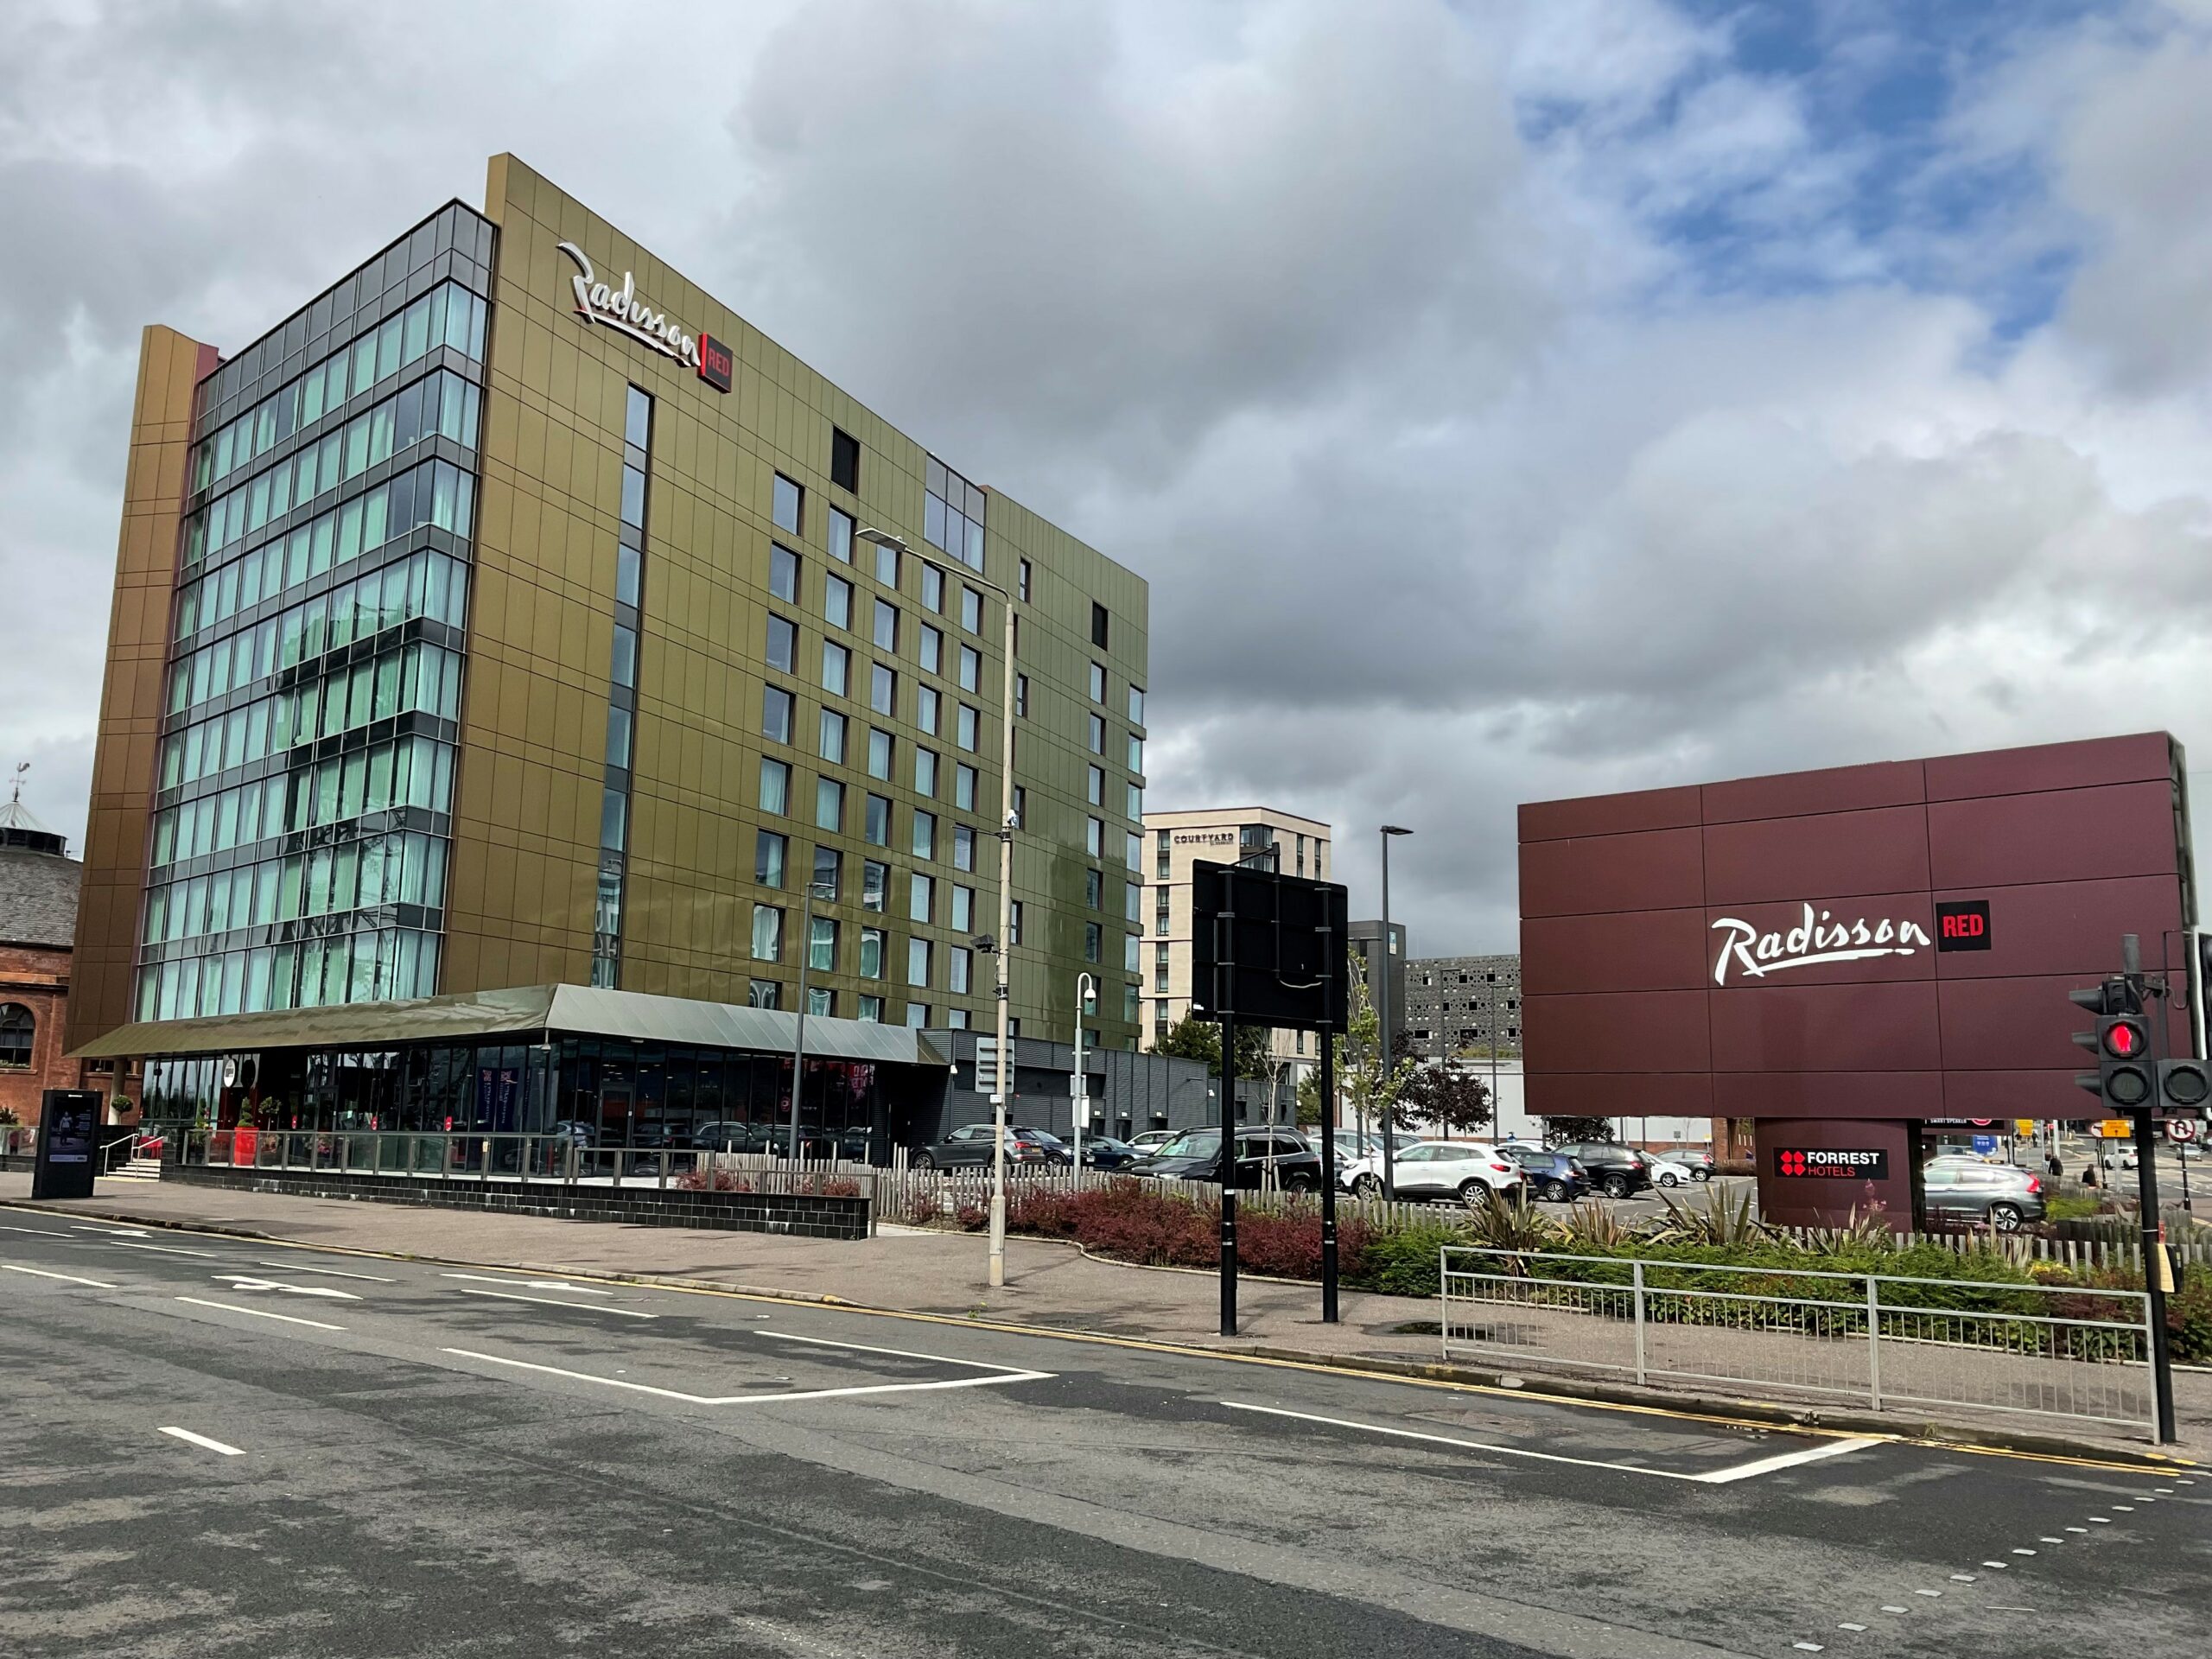 REVIEW: Radisson hotel, Glasgow - Turning left for less